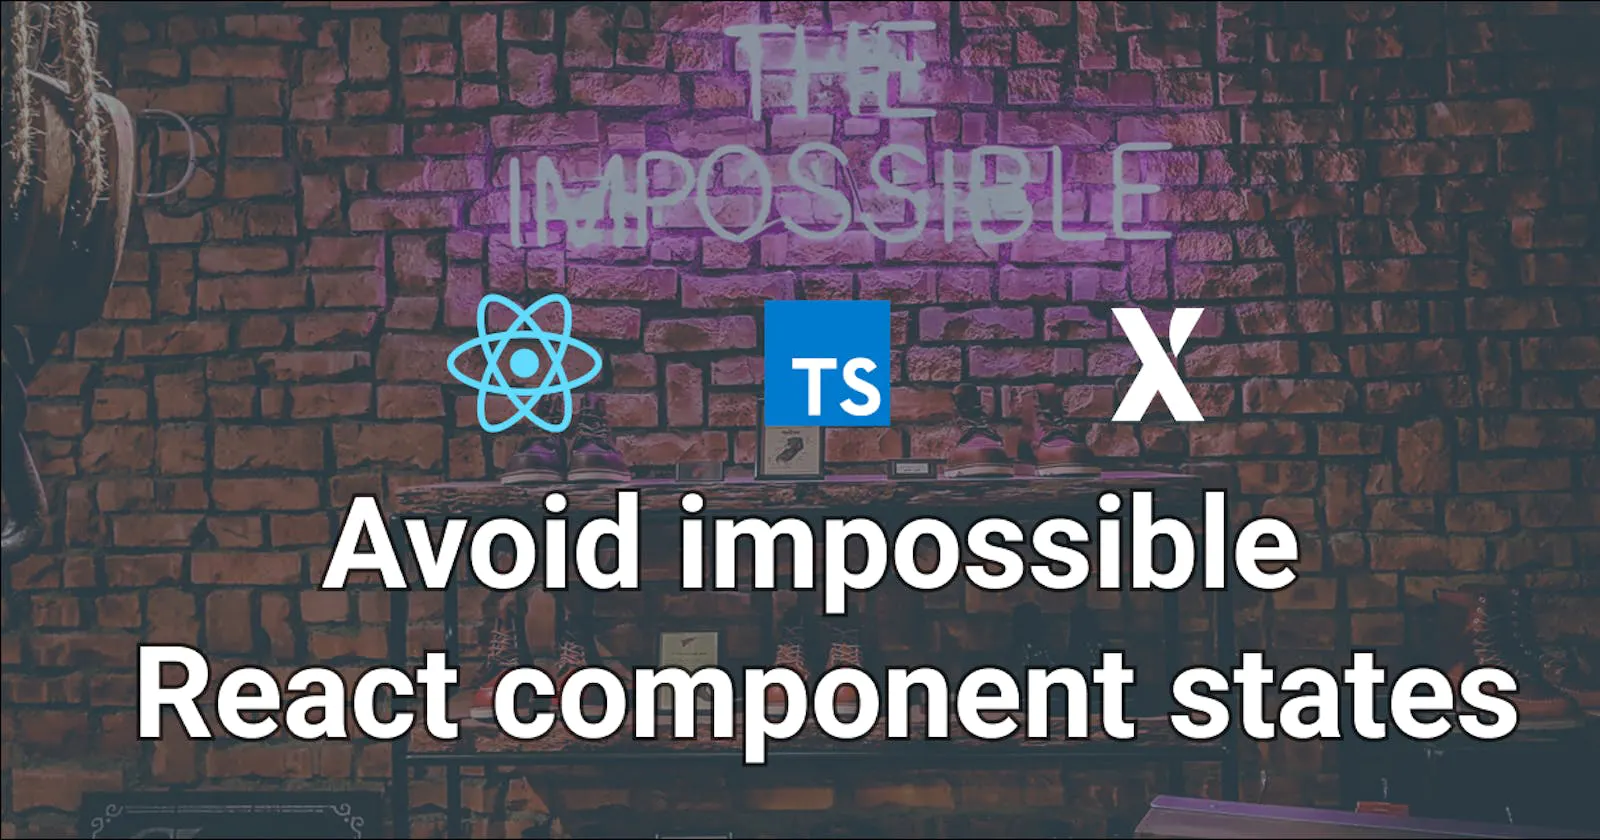 Avoid impossible UI states with React, Typescript and xState